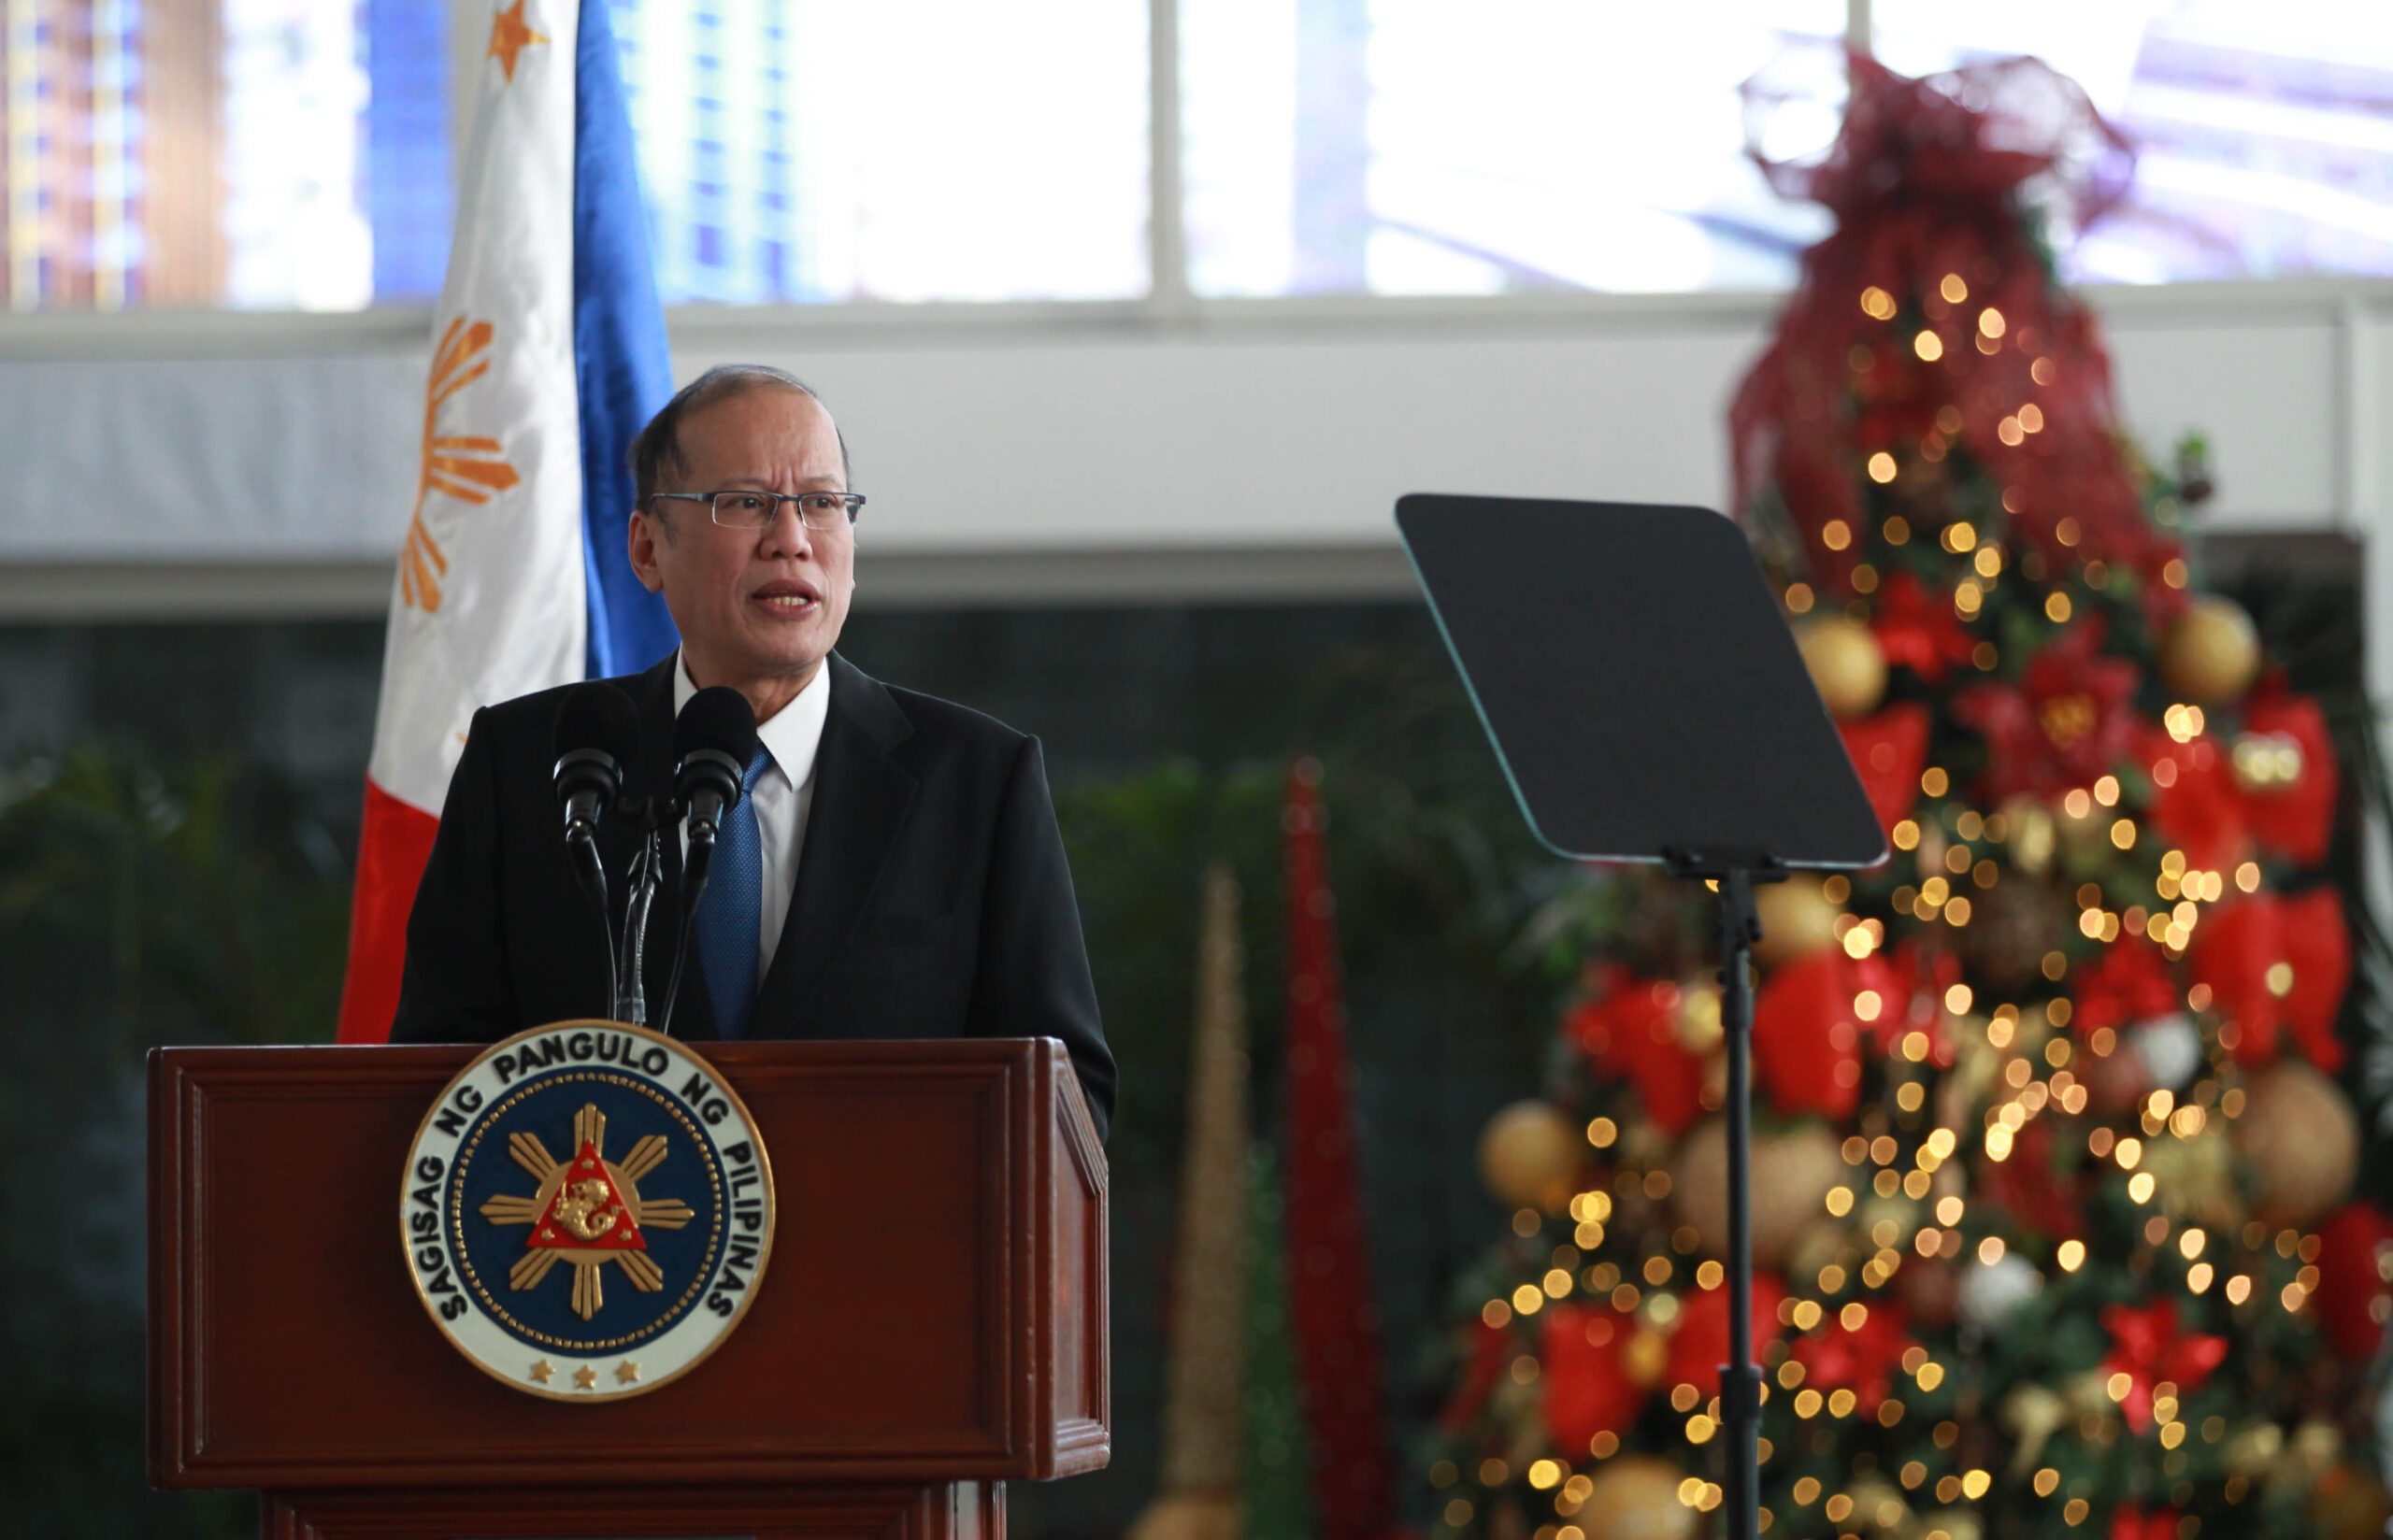 Aquino OKs holiday ceasefire with communist rebels